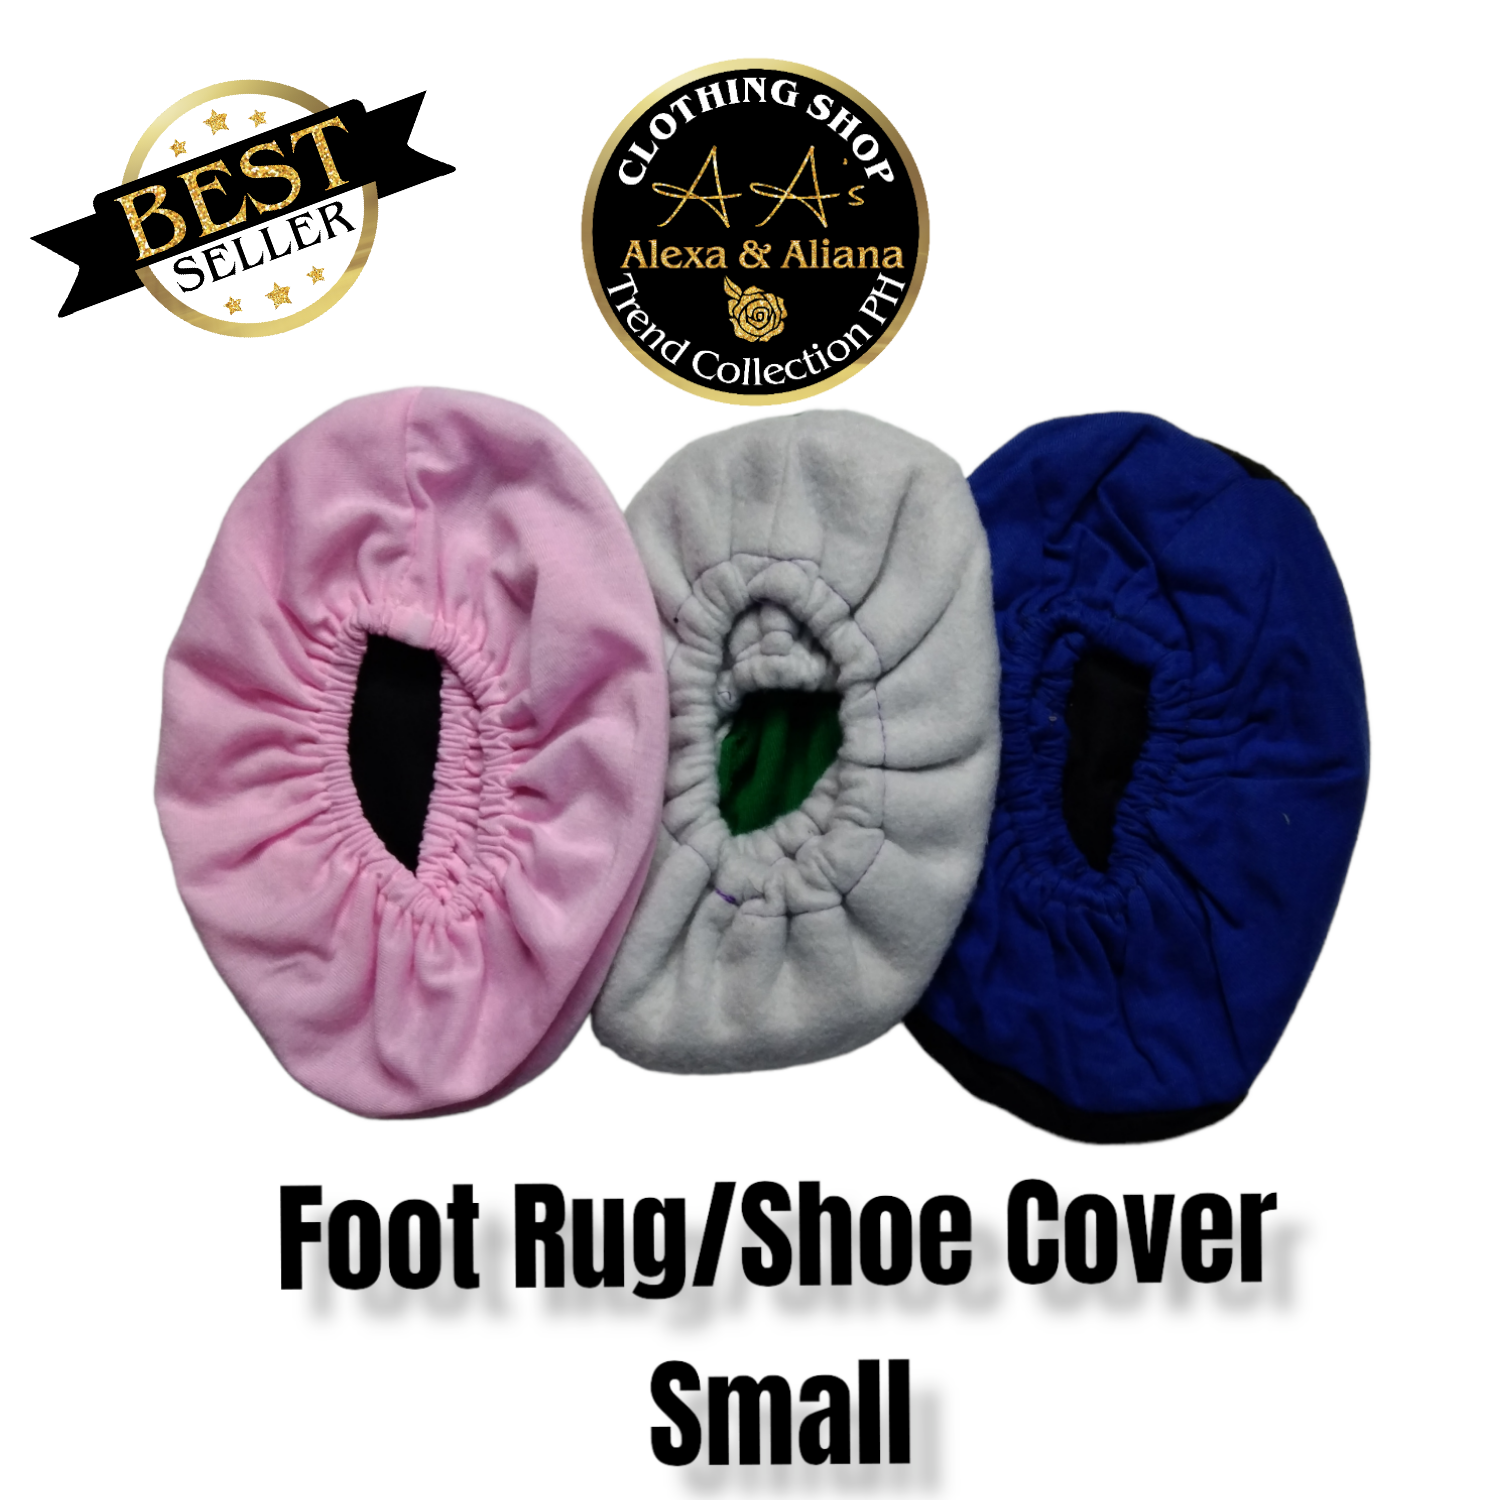 Foot Rug/Shoe Cover SMALL